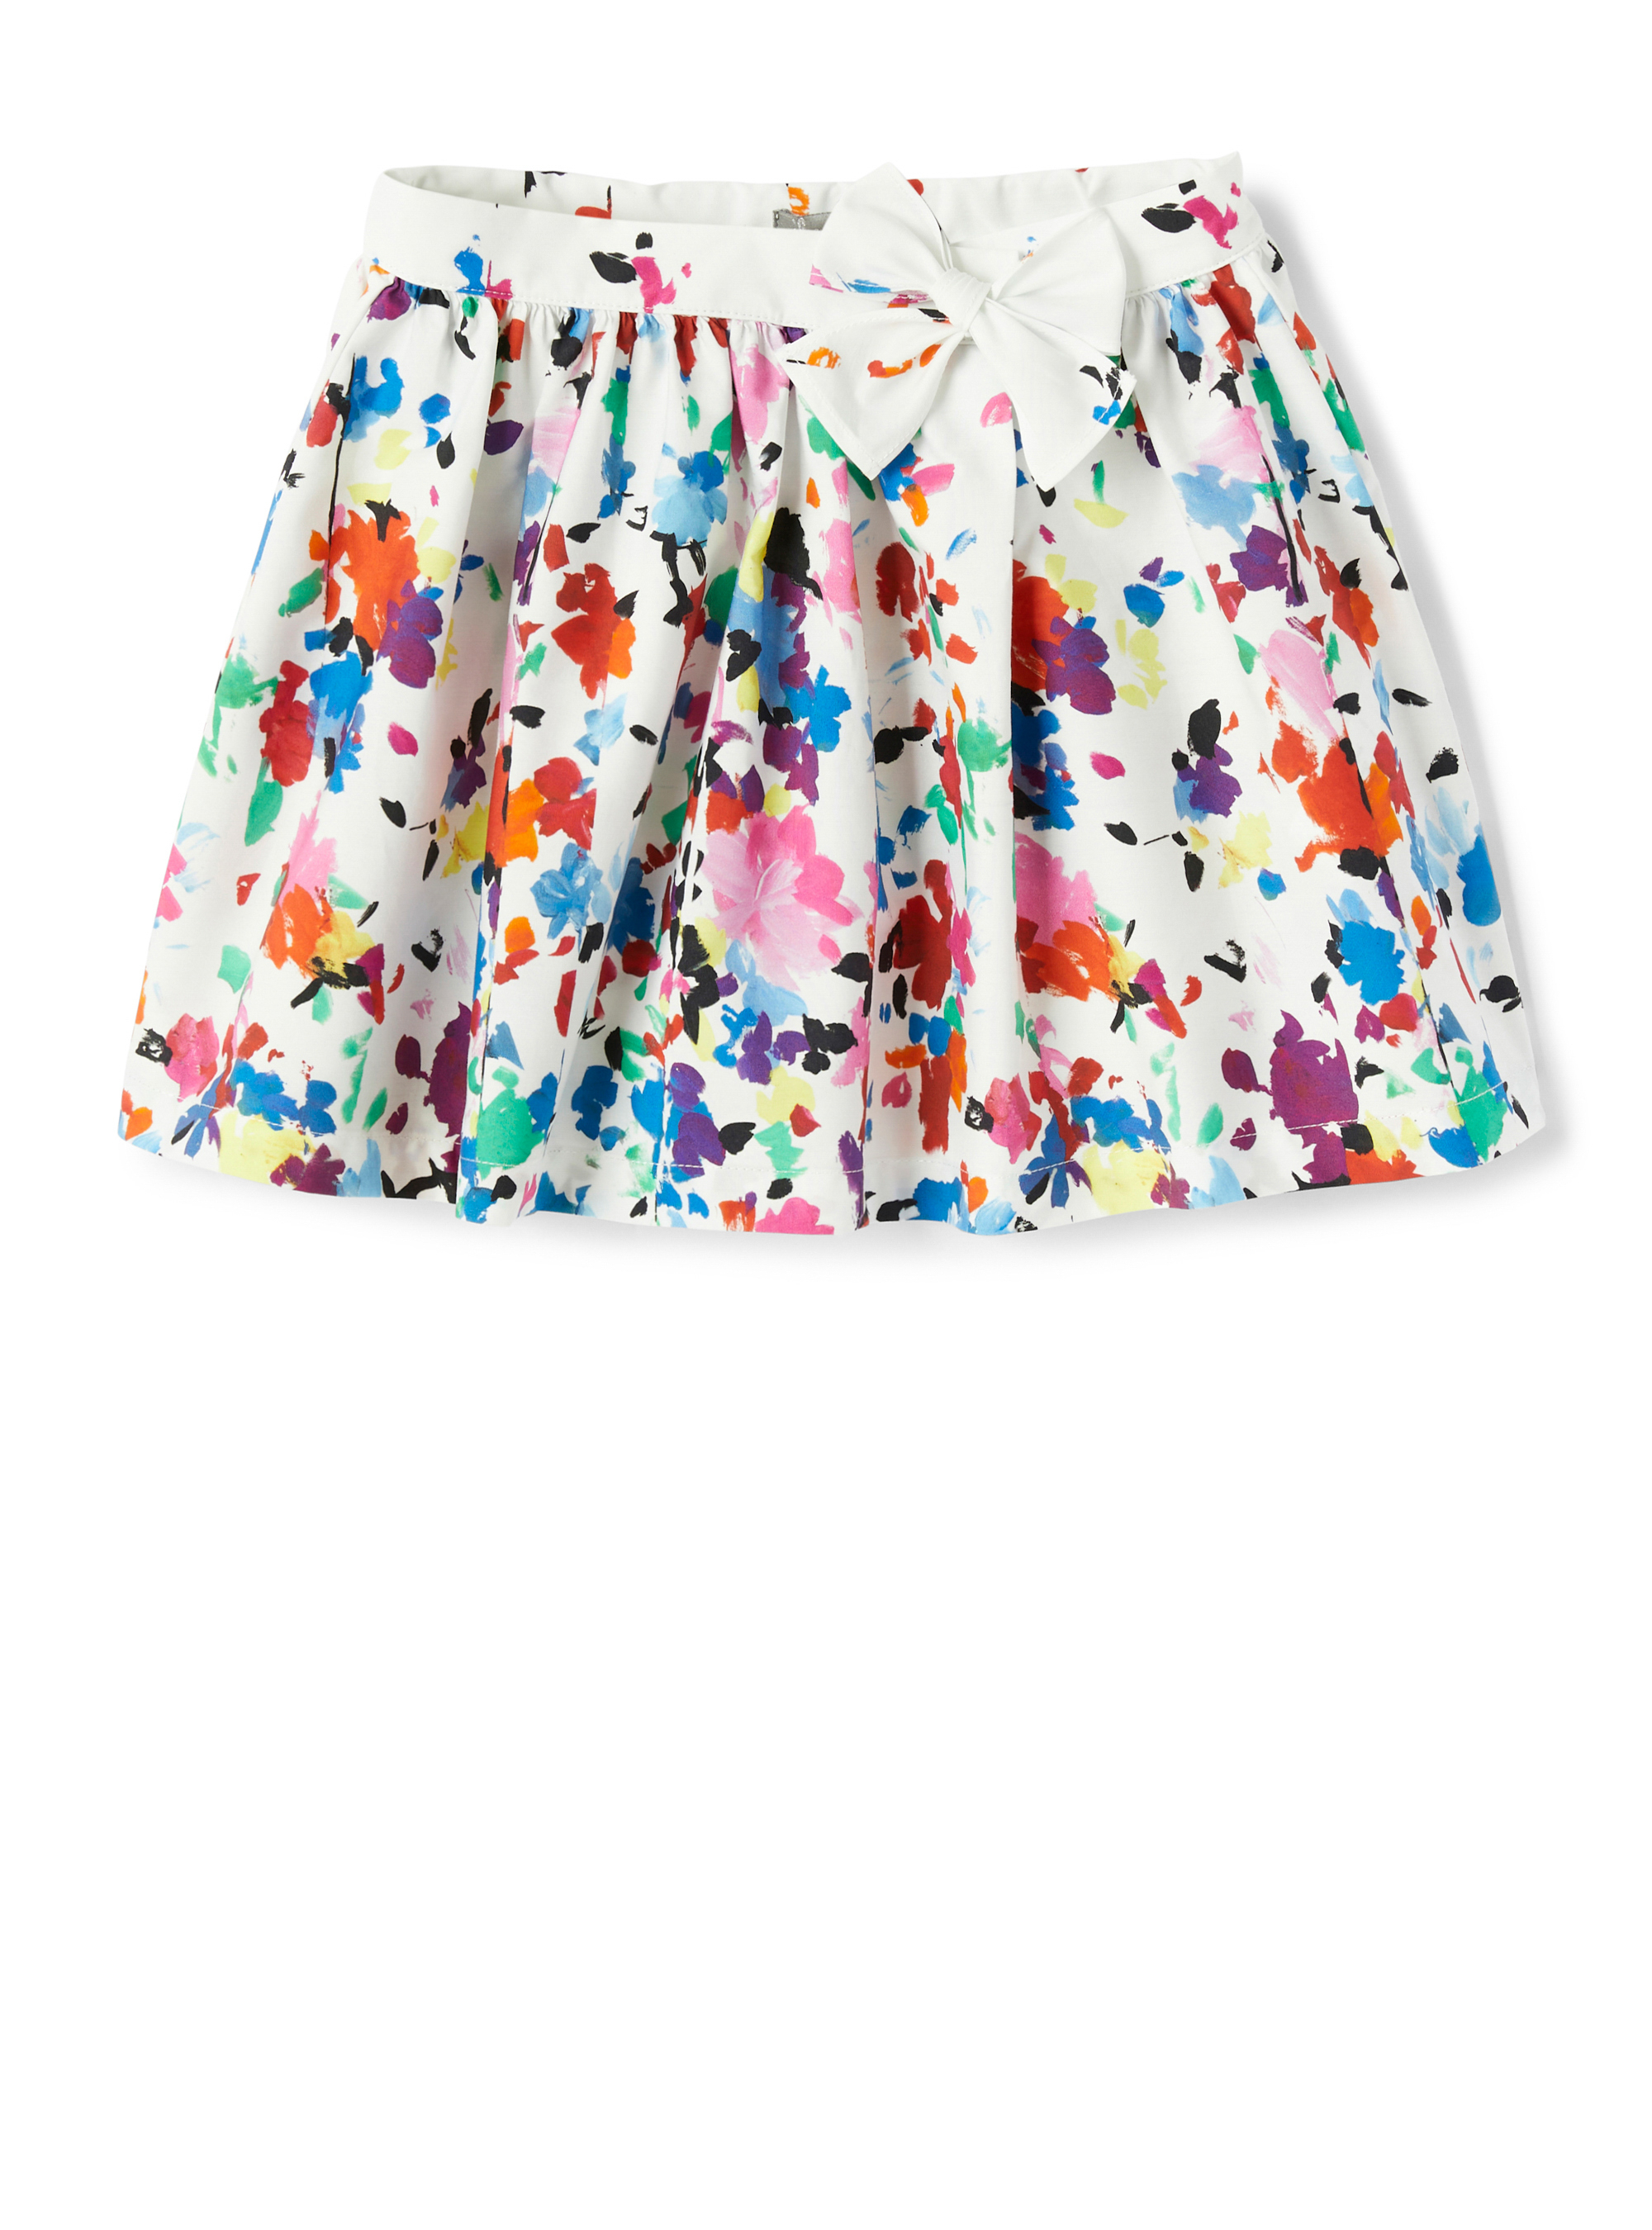 Circle skirt with abstract flowers - Skirts - Il Gufo